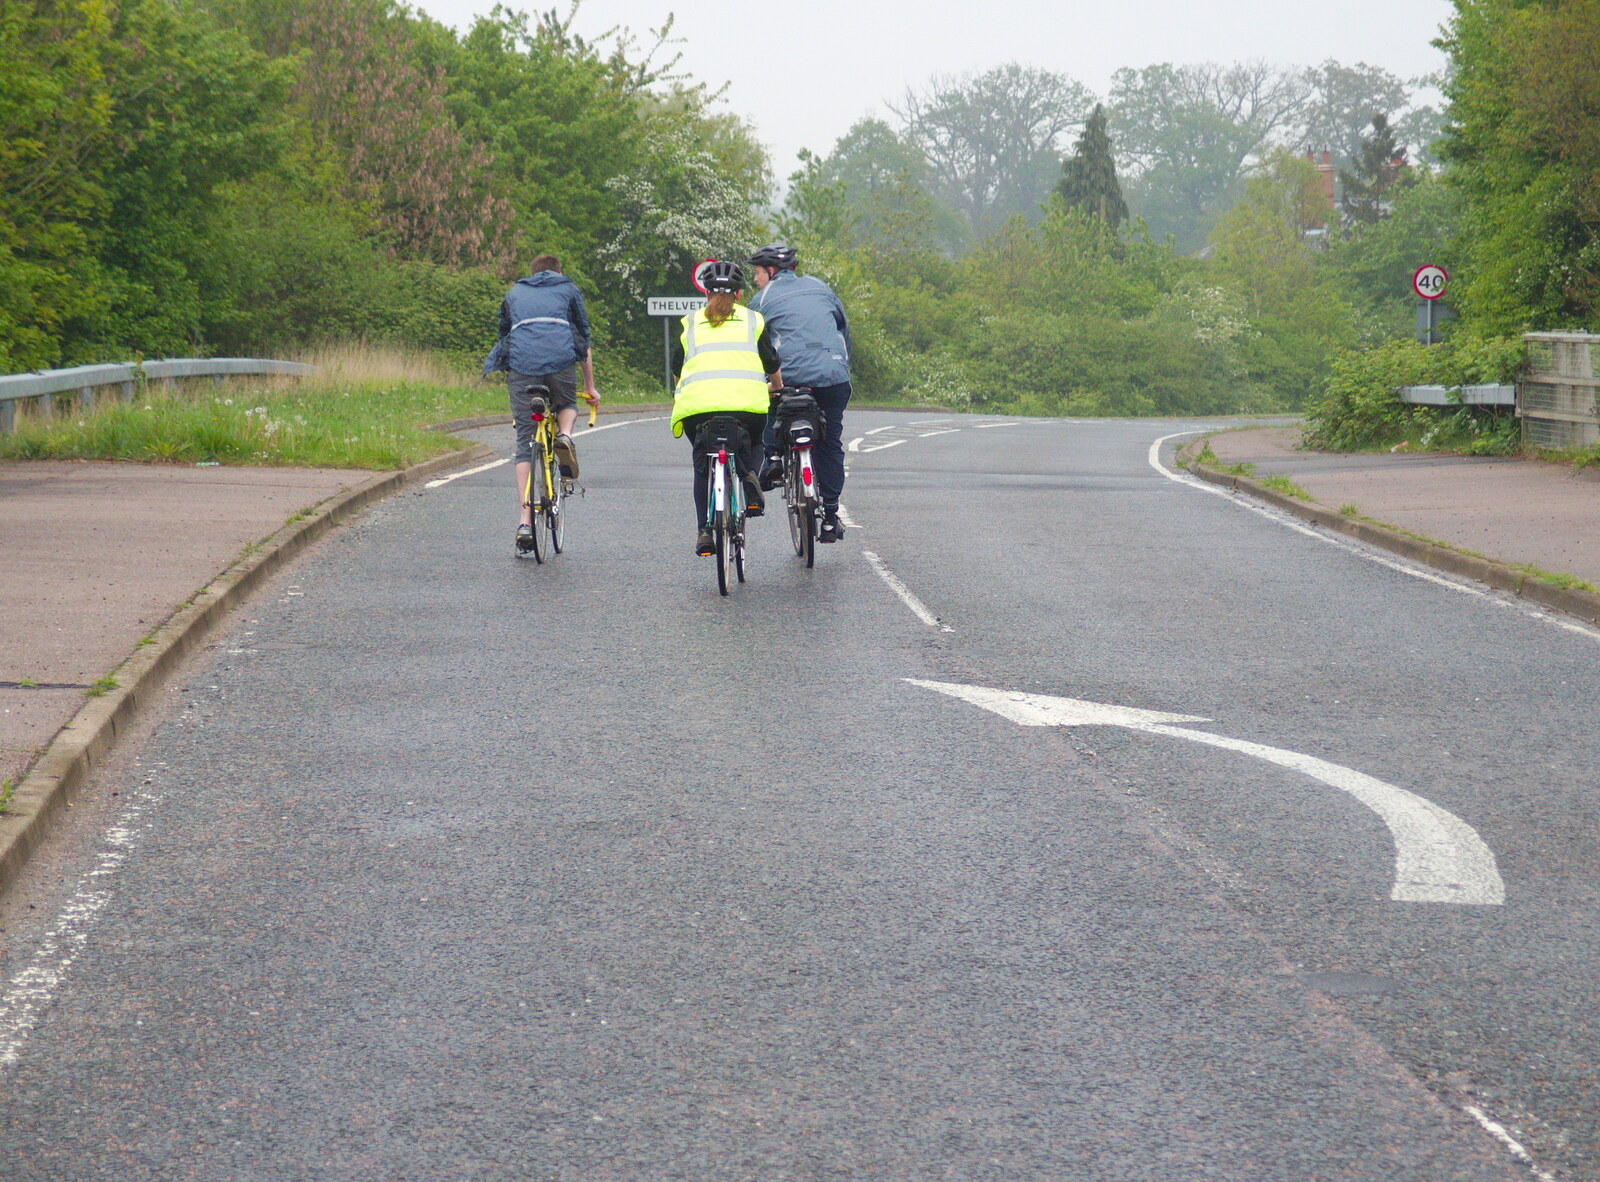 Phil, Suey and Paul on the road to Thelveton from The BSCC at the Burston Crown, and the Oaksmere Re-opens, Brome, Suffolk - 1st May 2014